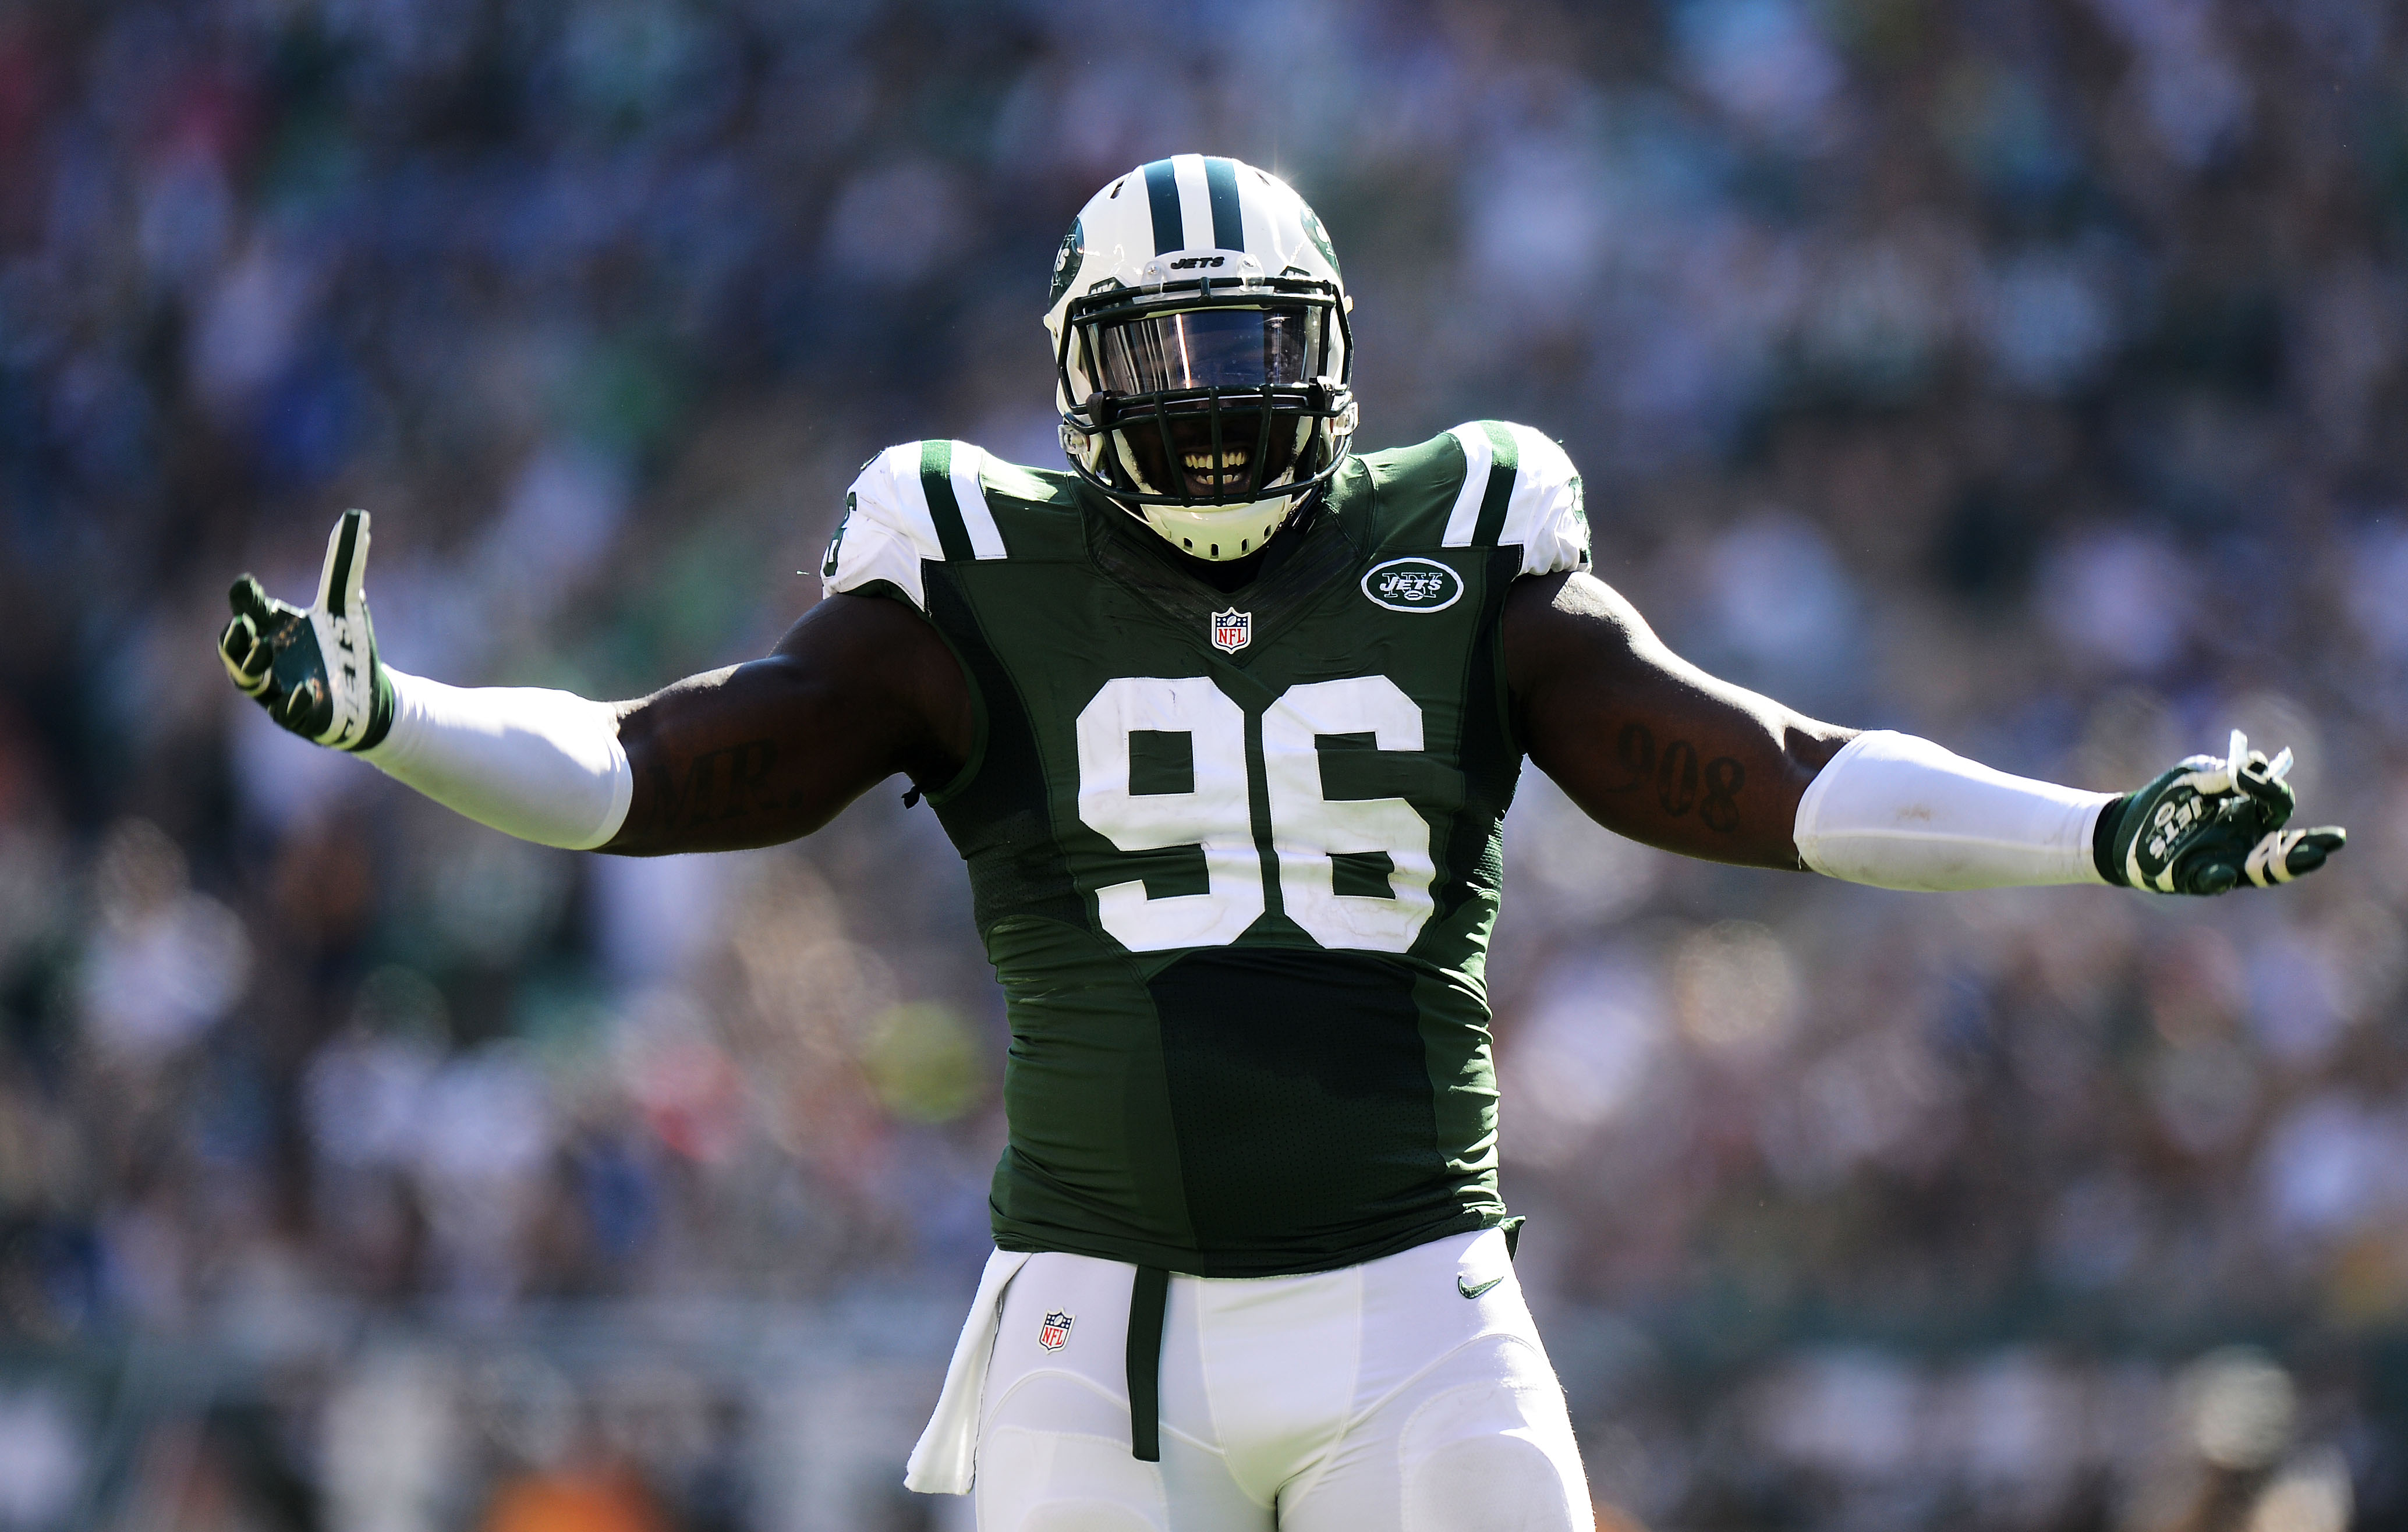 EAST RUTHERFORD, NJ - SEPTEMBER 28:   Muhammad Wilkerson #96 of the New York Jets reacts during their game against the Detroit Lions at MetLife Stadium on September 28, 2014 in East Rutherford, New Jersey.  (Photo by Ron Antonelli/Getty Images)